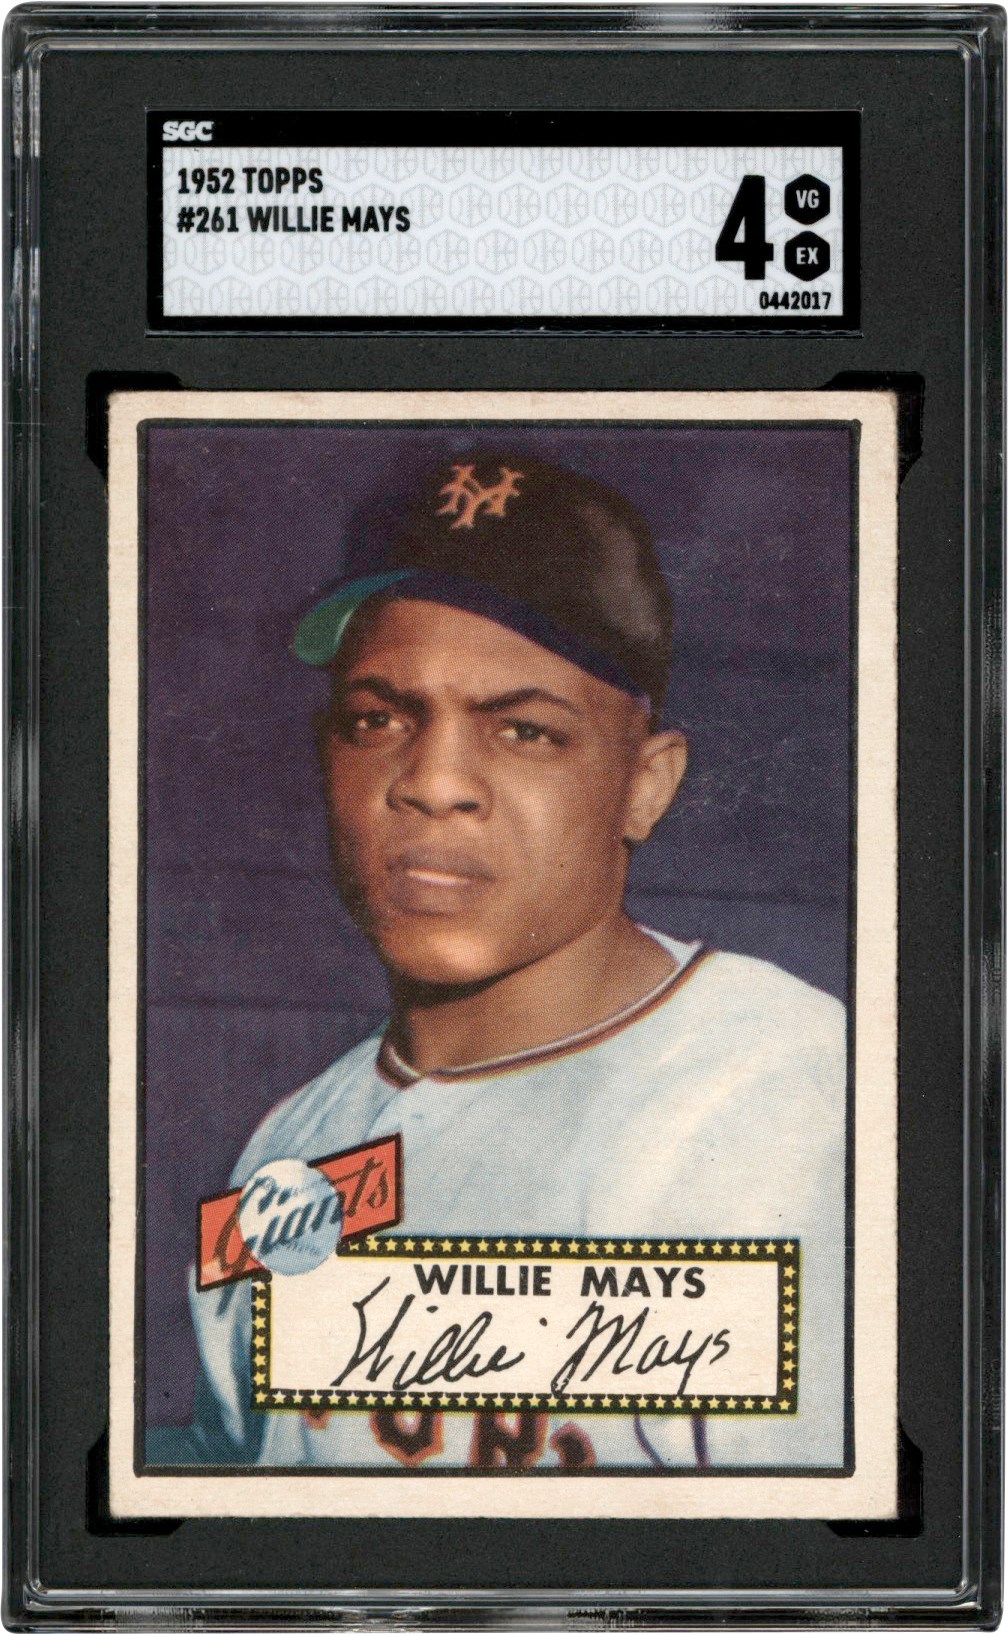 Baseball and Trading Cards - 1952 Topps #261 Willie Mays SGC VG-EX 4